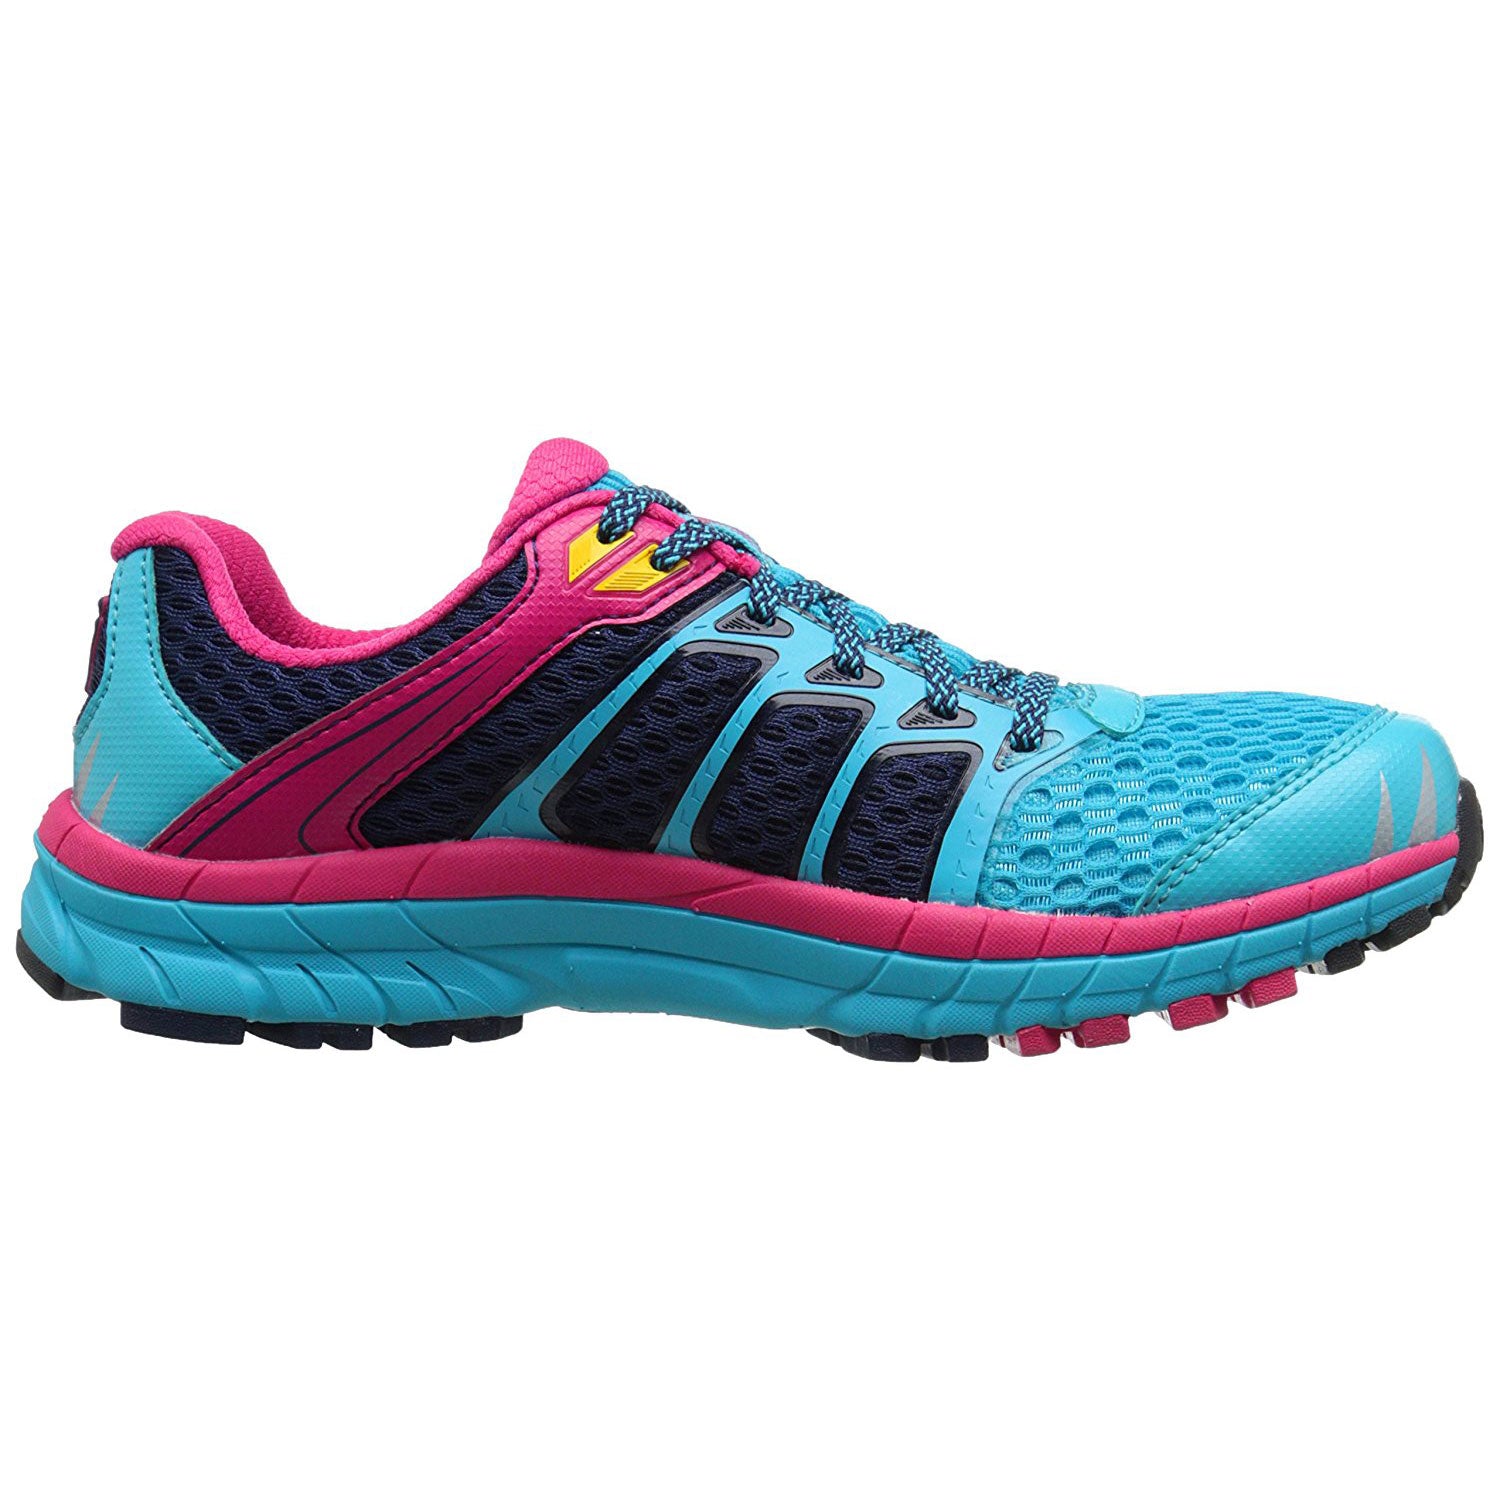 Inov 8 Road Claw™ 275 Running Shoes - Women's | The Last Hunt